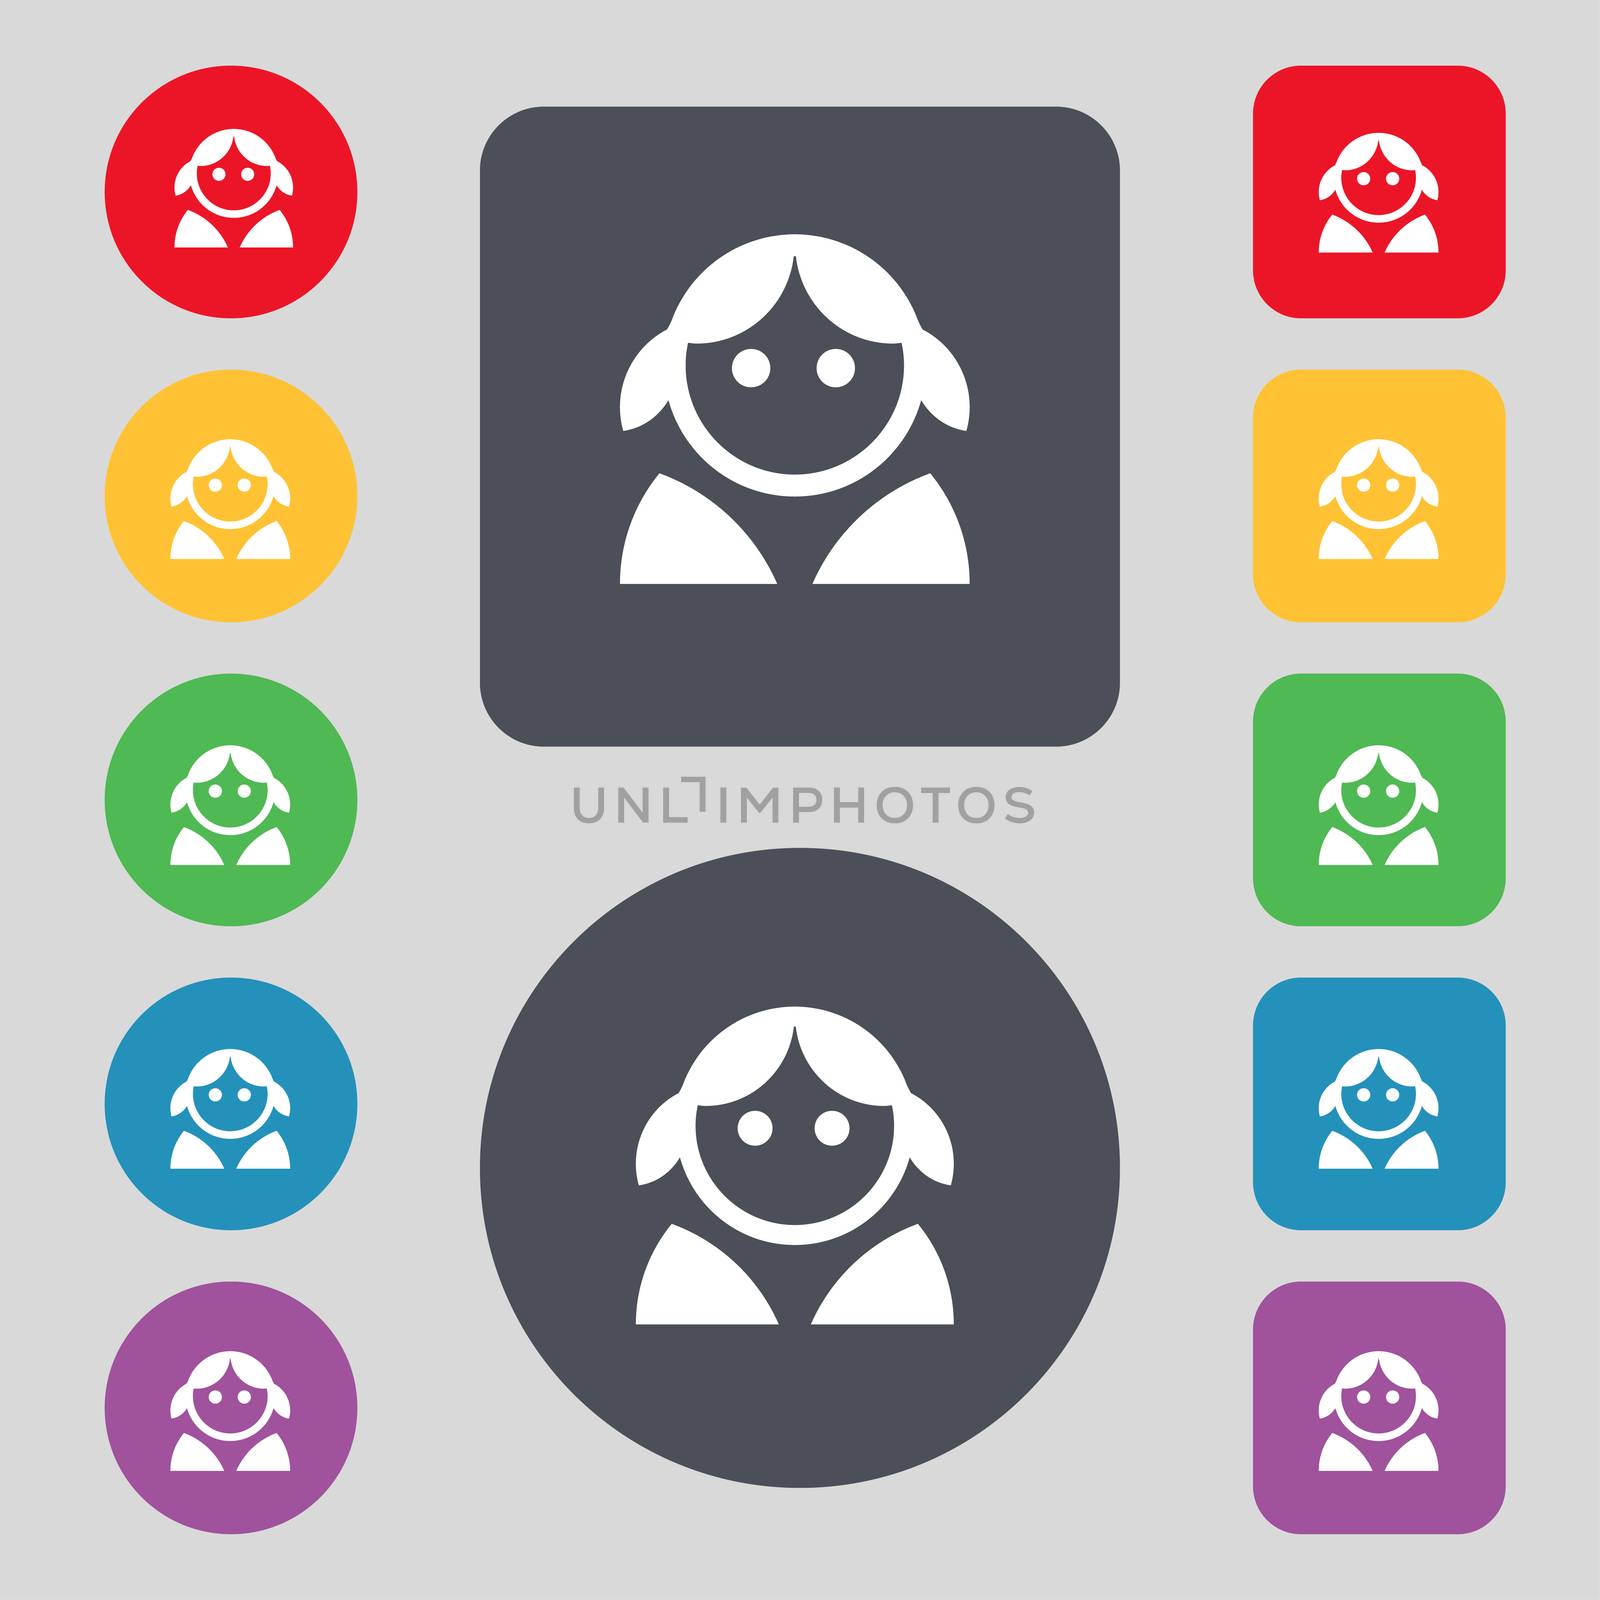 Female, Woman human, Women toilet, User, Login icon sign. A set of 12 colored buttons. Flat design. illustration